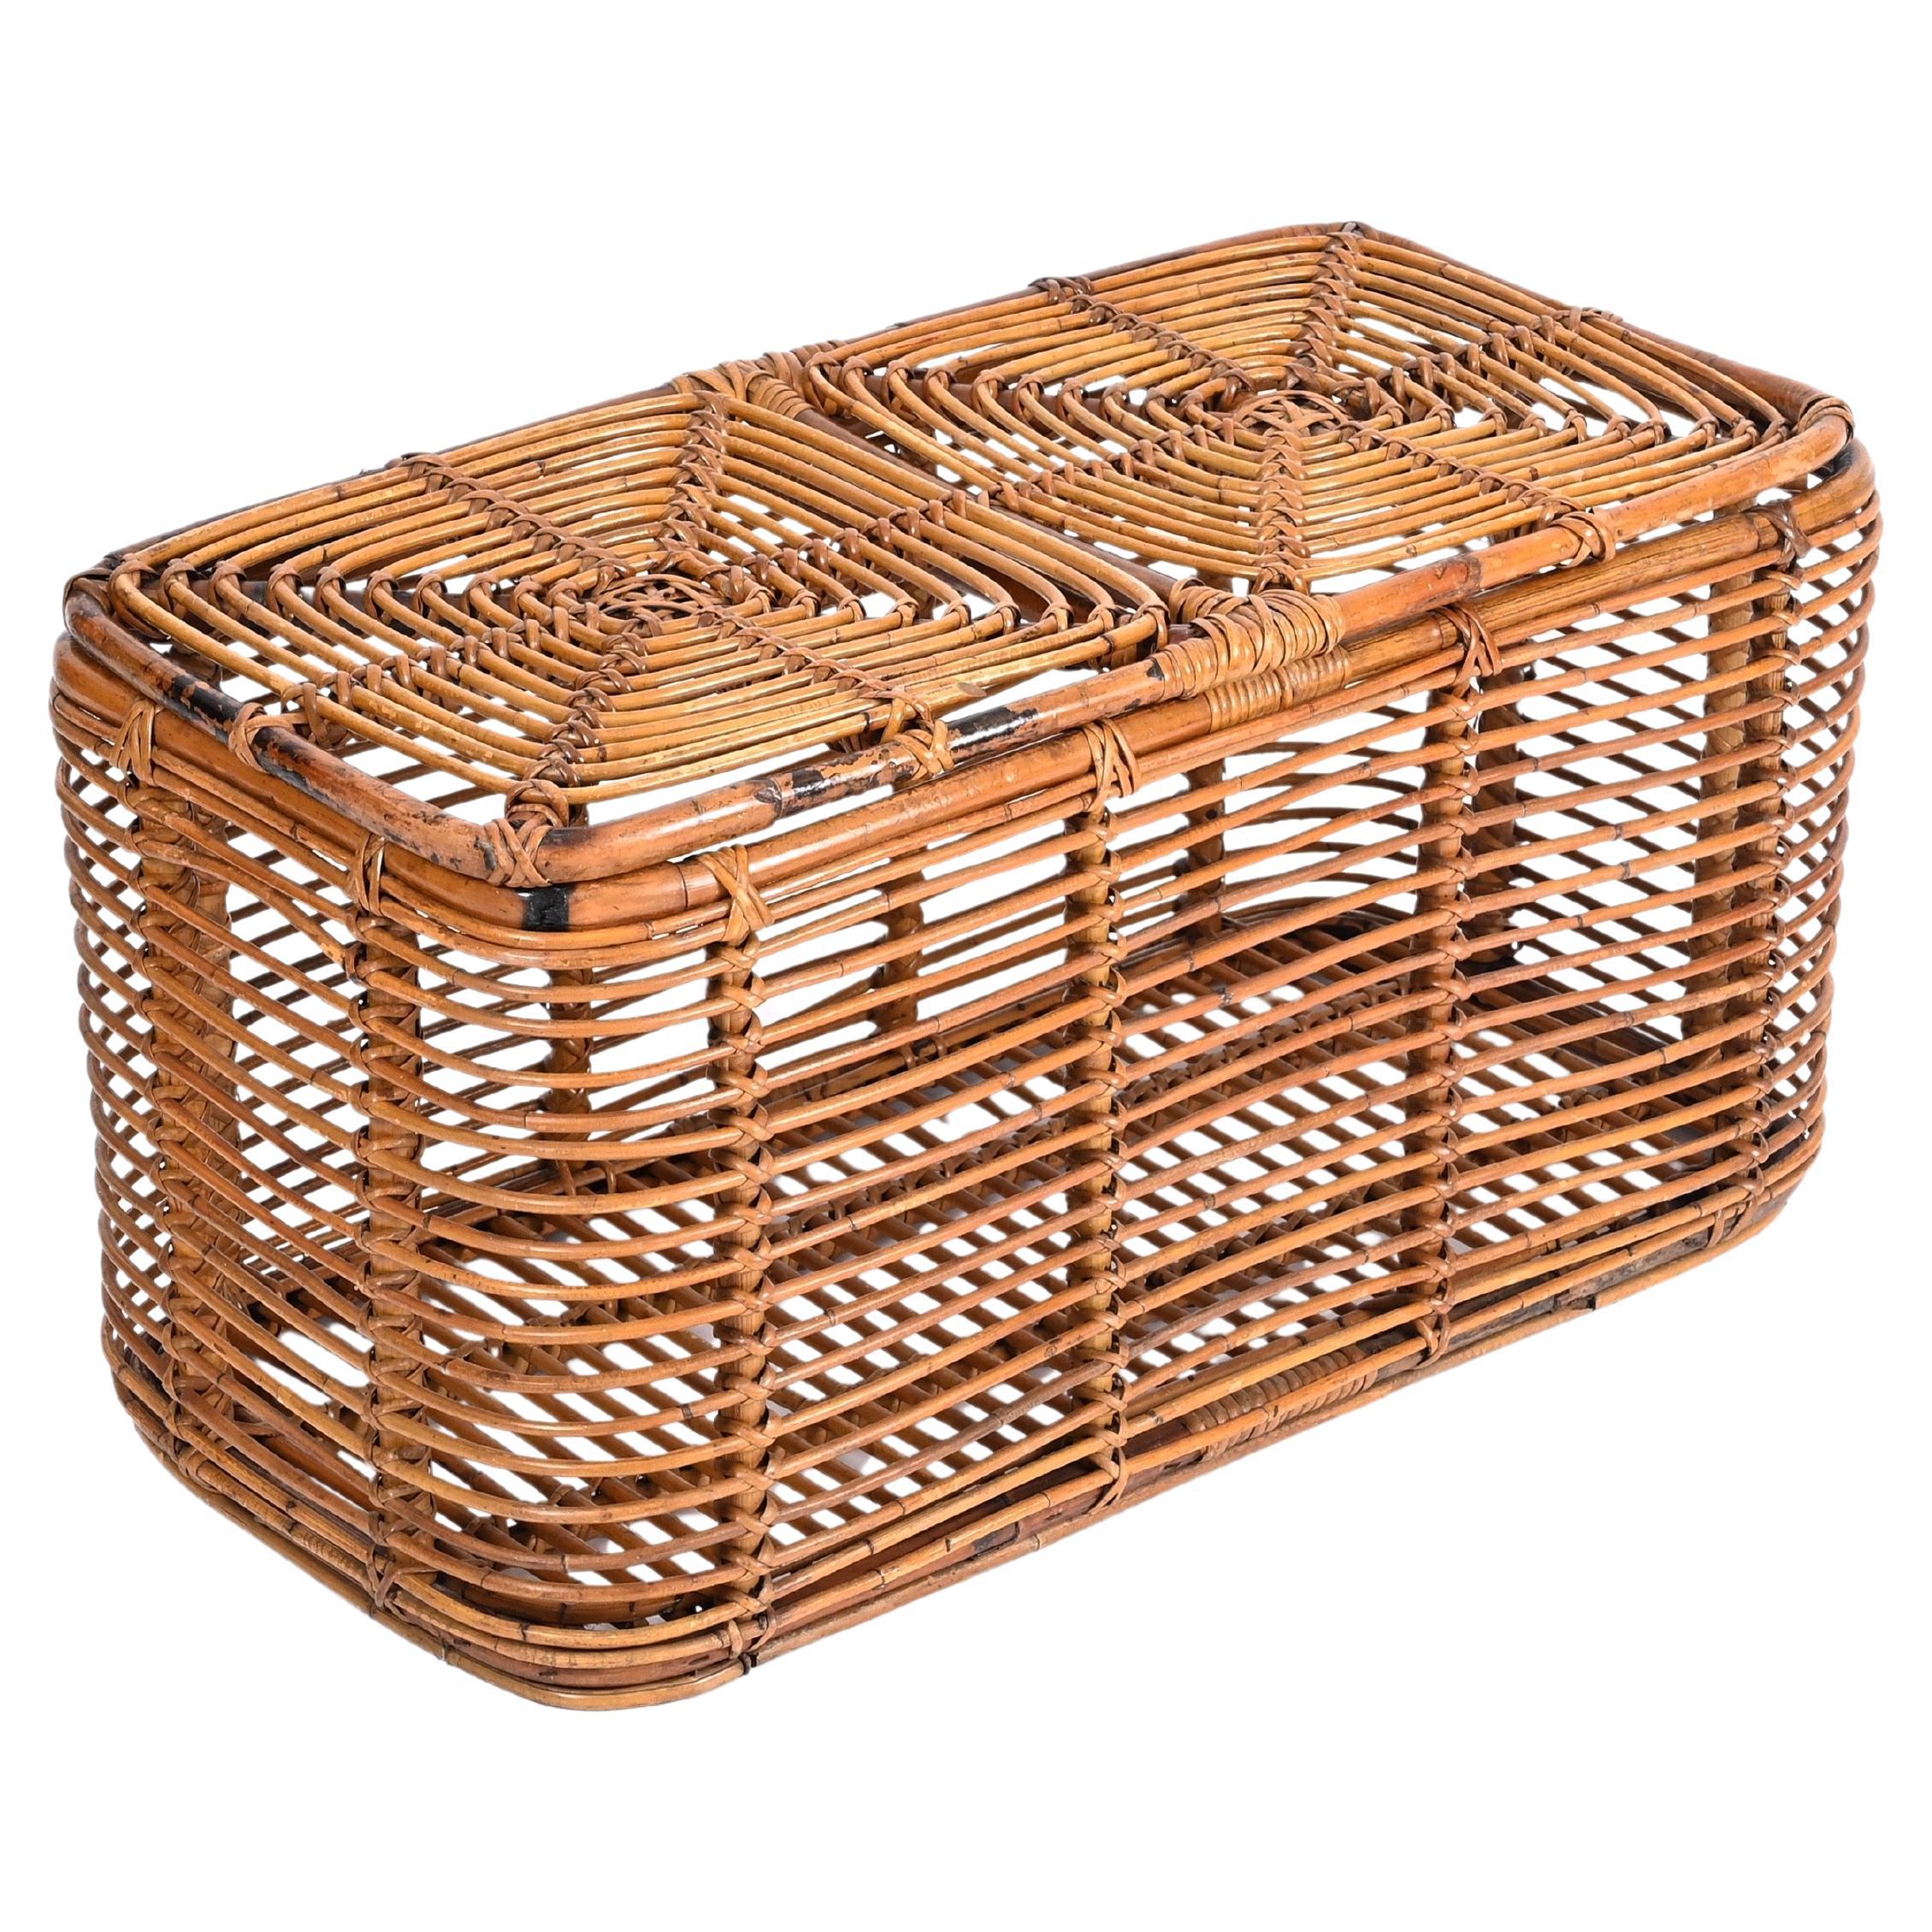 Midcentury French Riviera Bamboo and Woven Rattan Italian Basket, 1960s For Sale